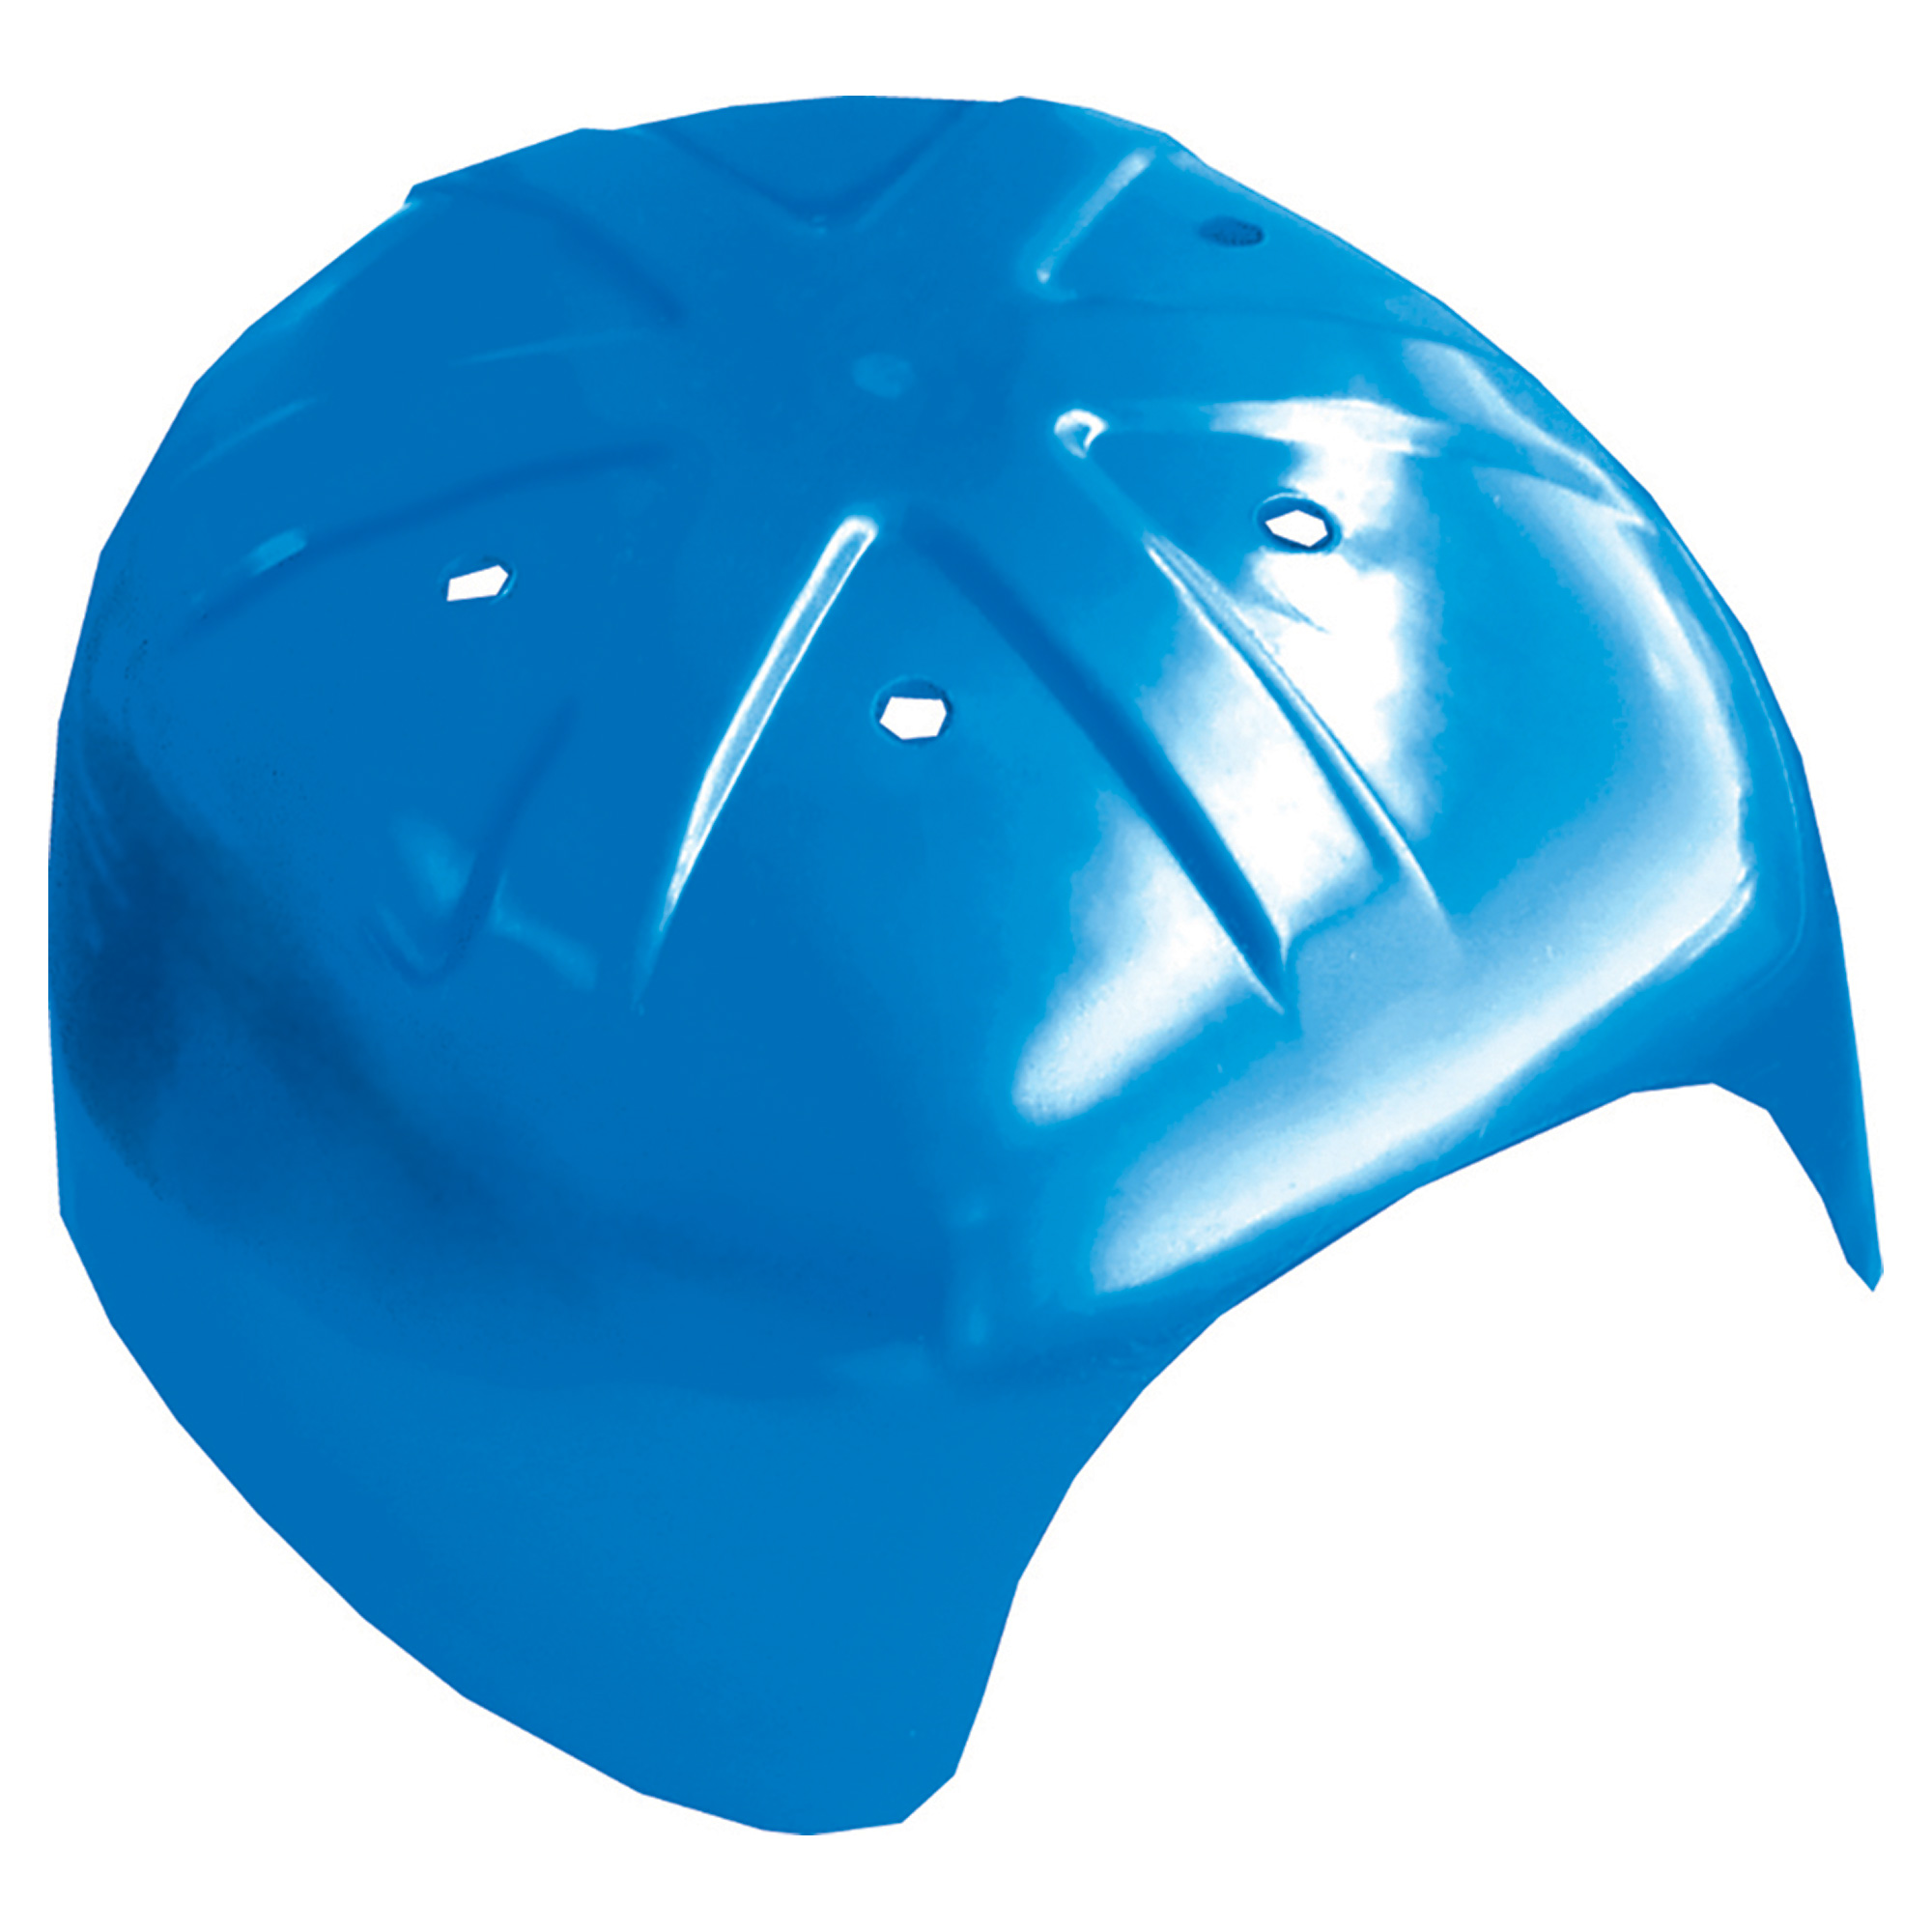 Occunomix RK800-01 Classic Hard Hat Tube Liner Navy